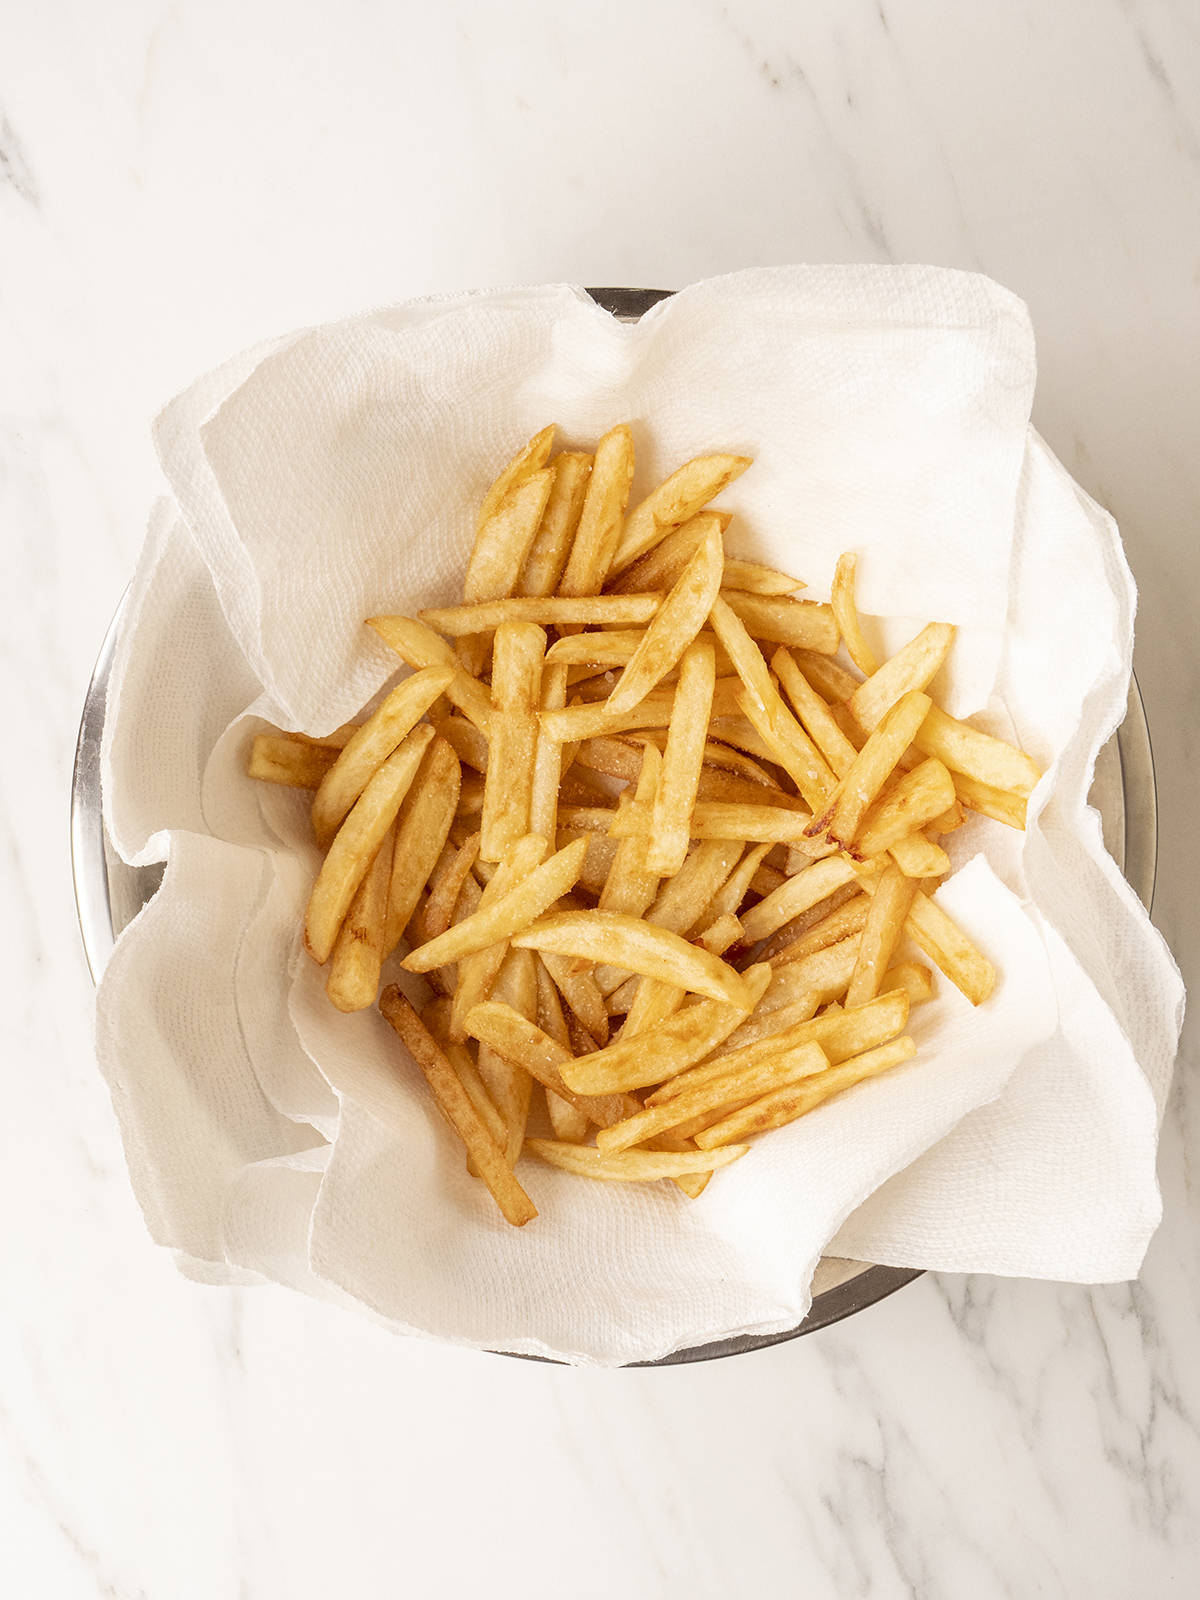 Homemade fries that are drying in a paper towel lined bowl.  